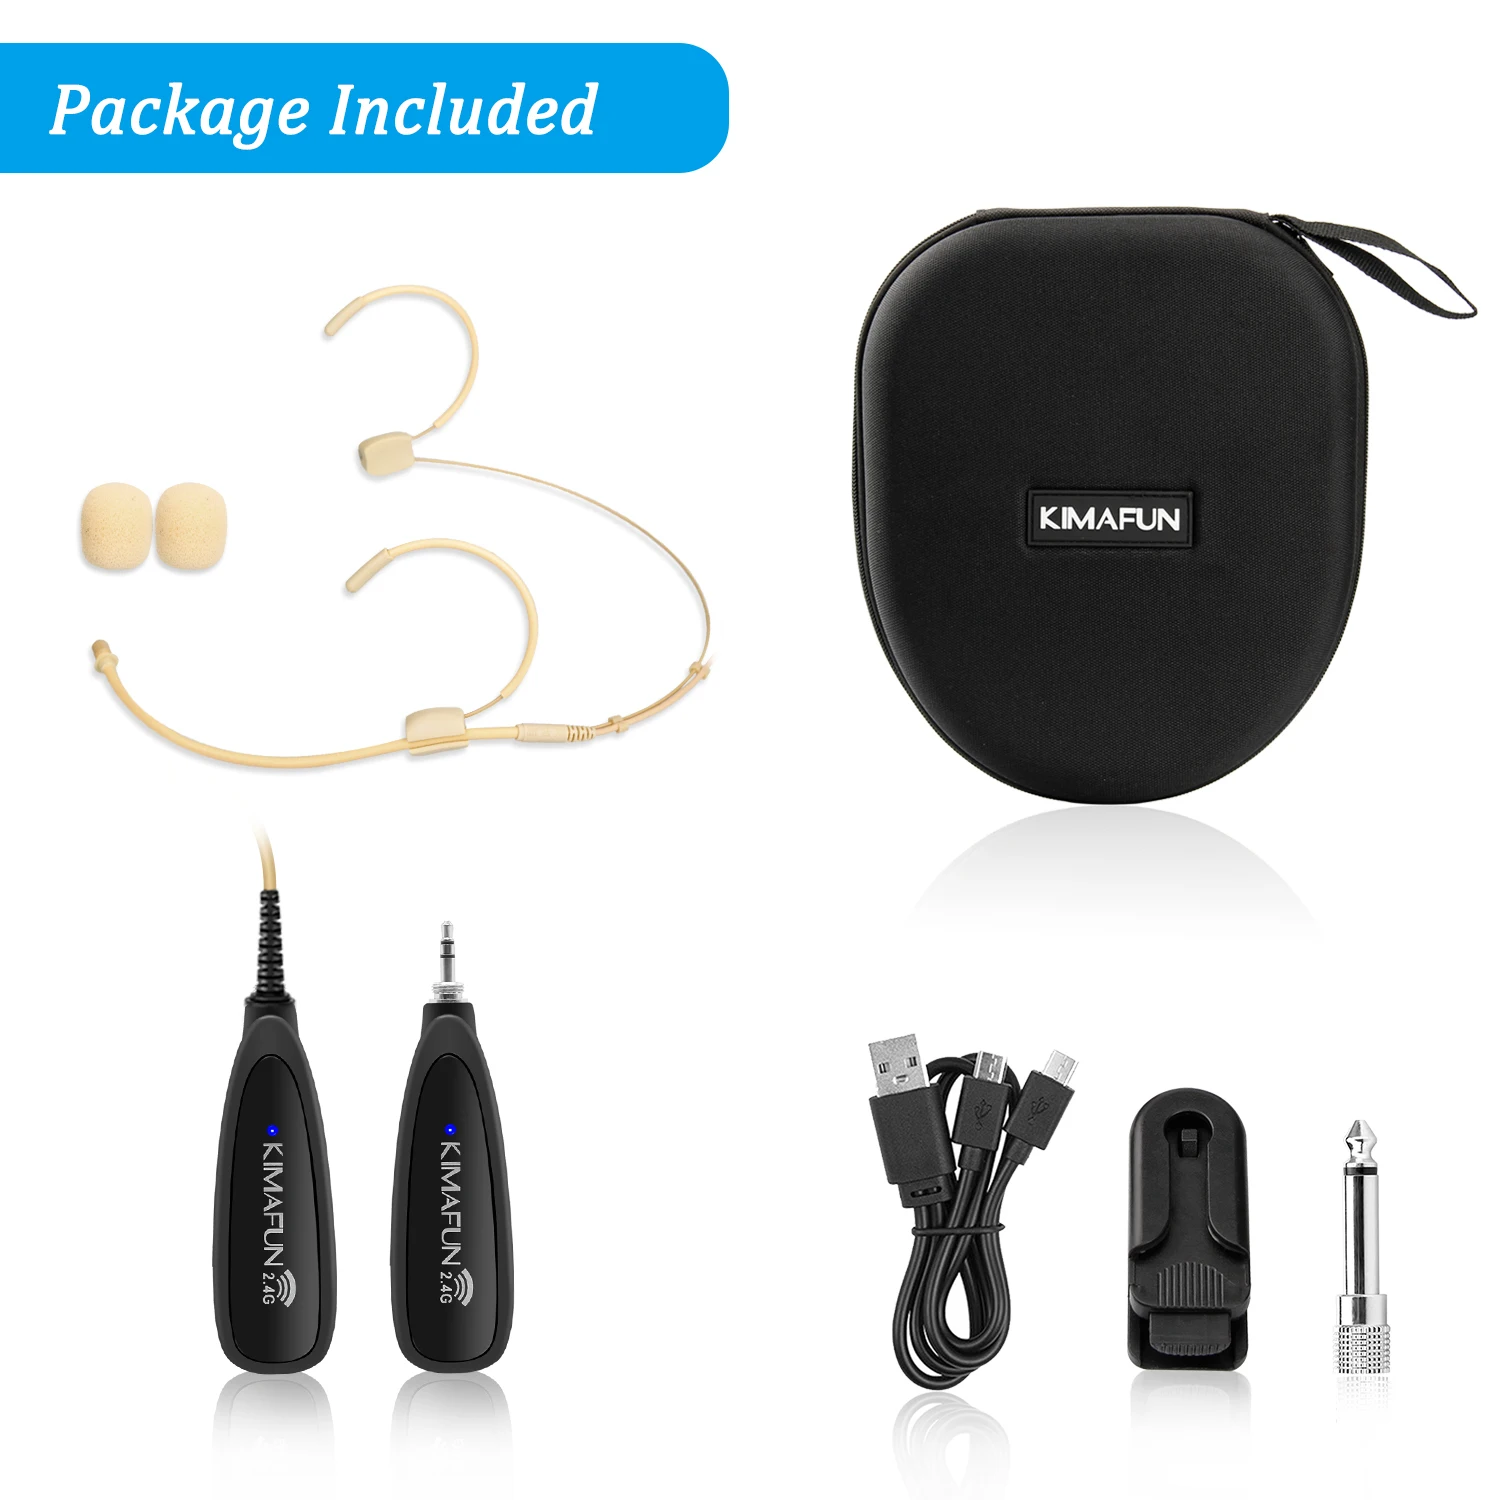 Microphones KIMAFUN 2.4G Wireless Microphone System Headset and Handheld 2 in 1 for Voice Amplifier Recording Speaking Online Chatting